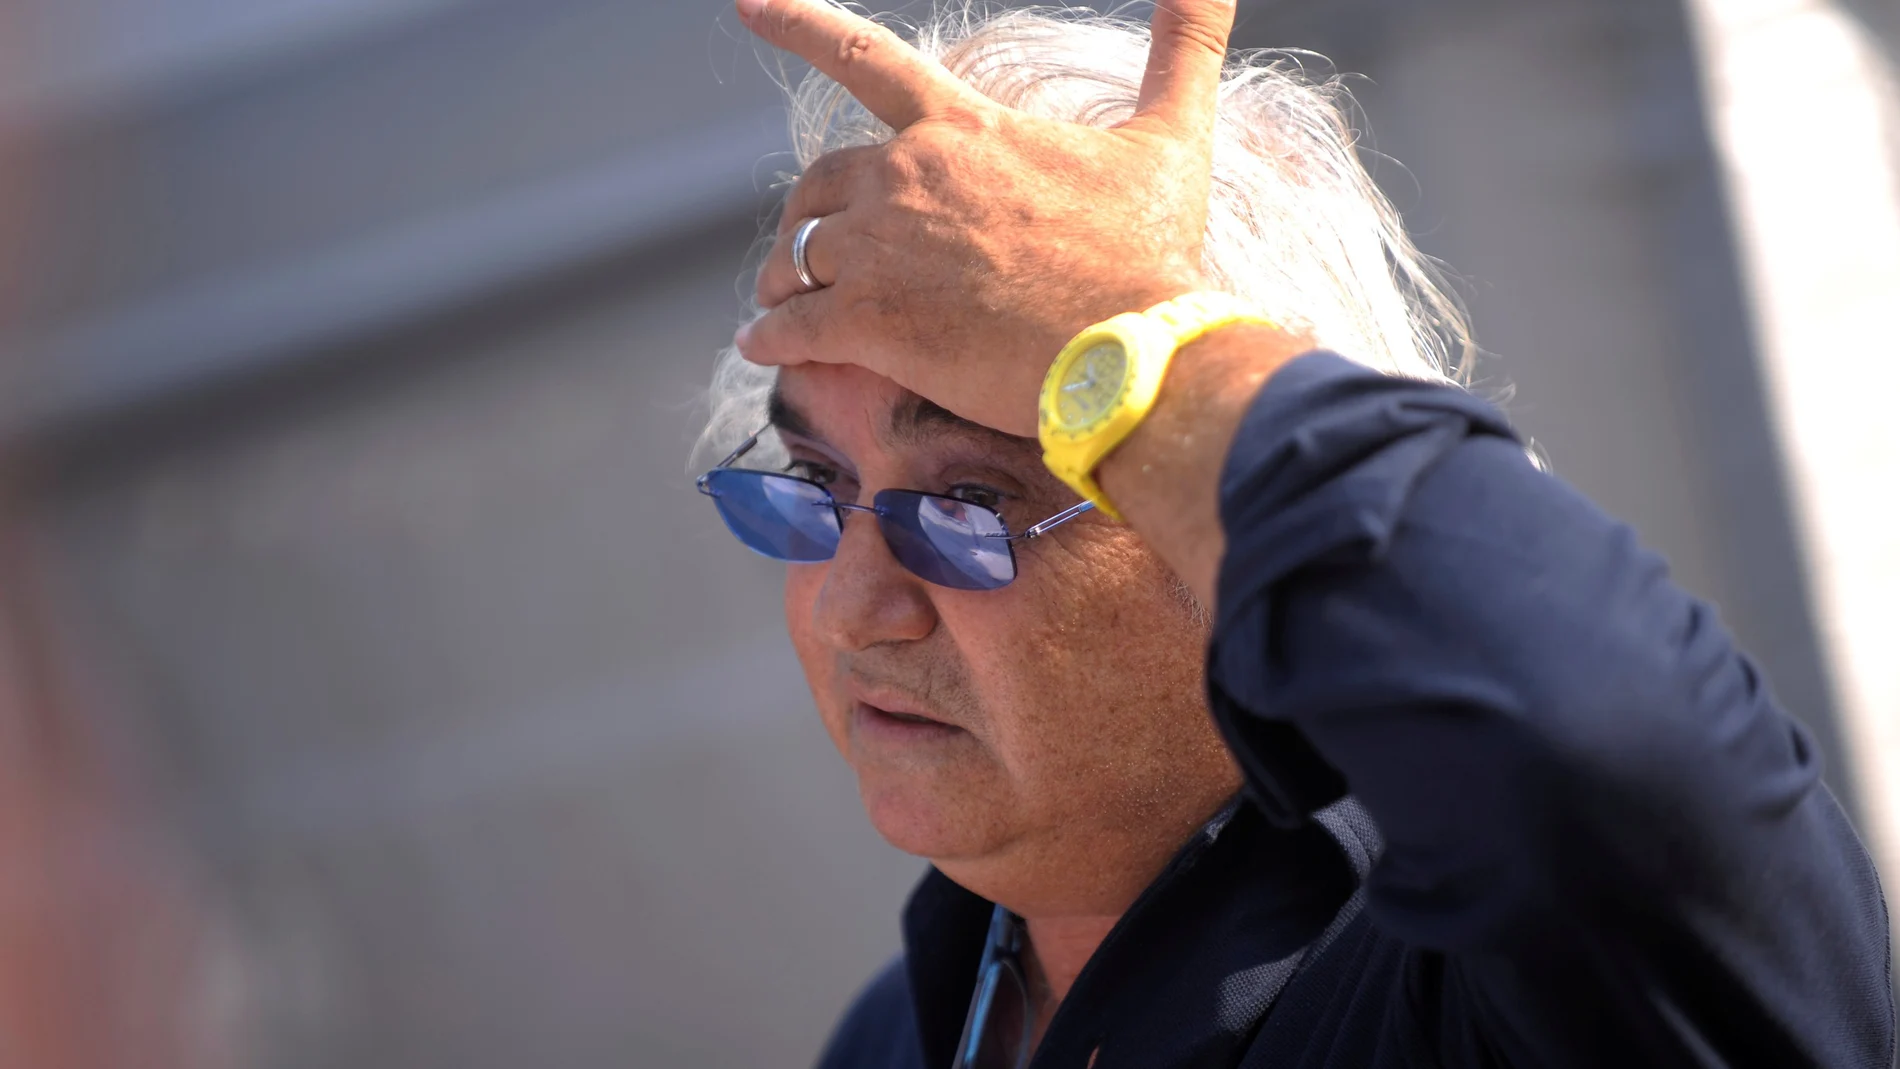 FILE PHOTO: Former Renault F1 principal Flavio Briatore gestures in the paddock after the qualifying session of the Italian F1 Grand Prix at the Monza circuit